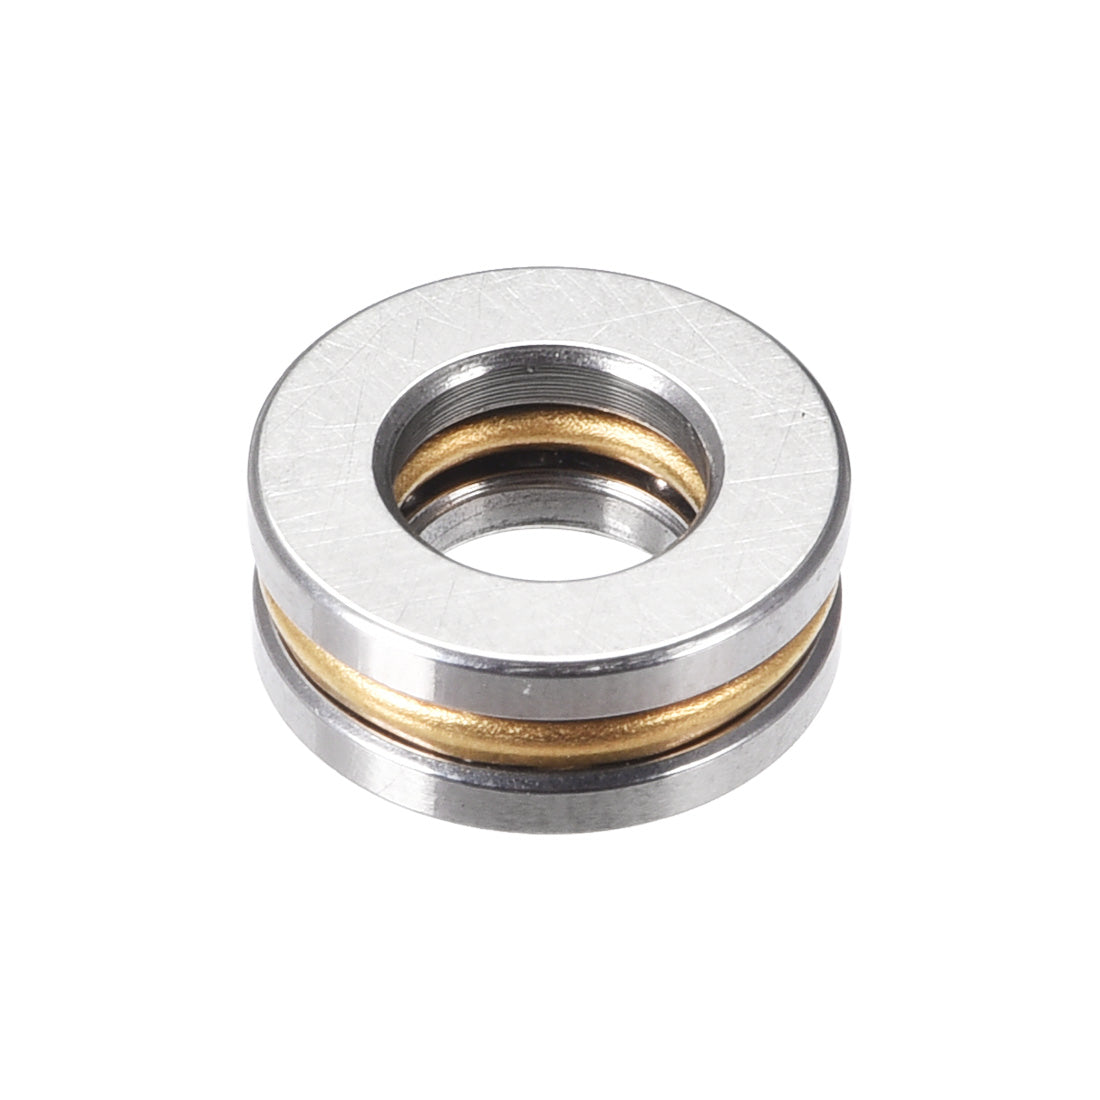 uxcell Uxcell F5-10M Miniature Thrust Ball Bearings 5x10x4mm Chrome Steel with Washers 2 Pcs